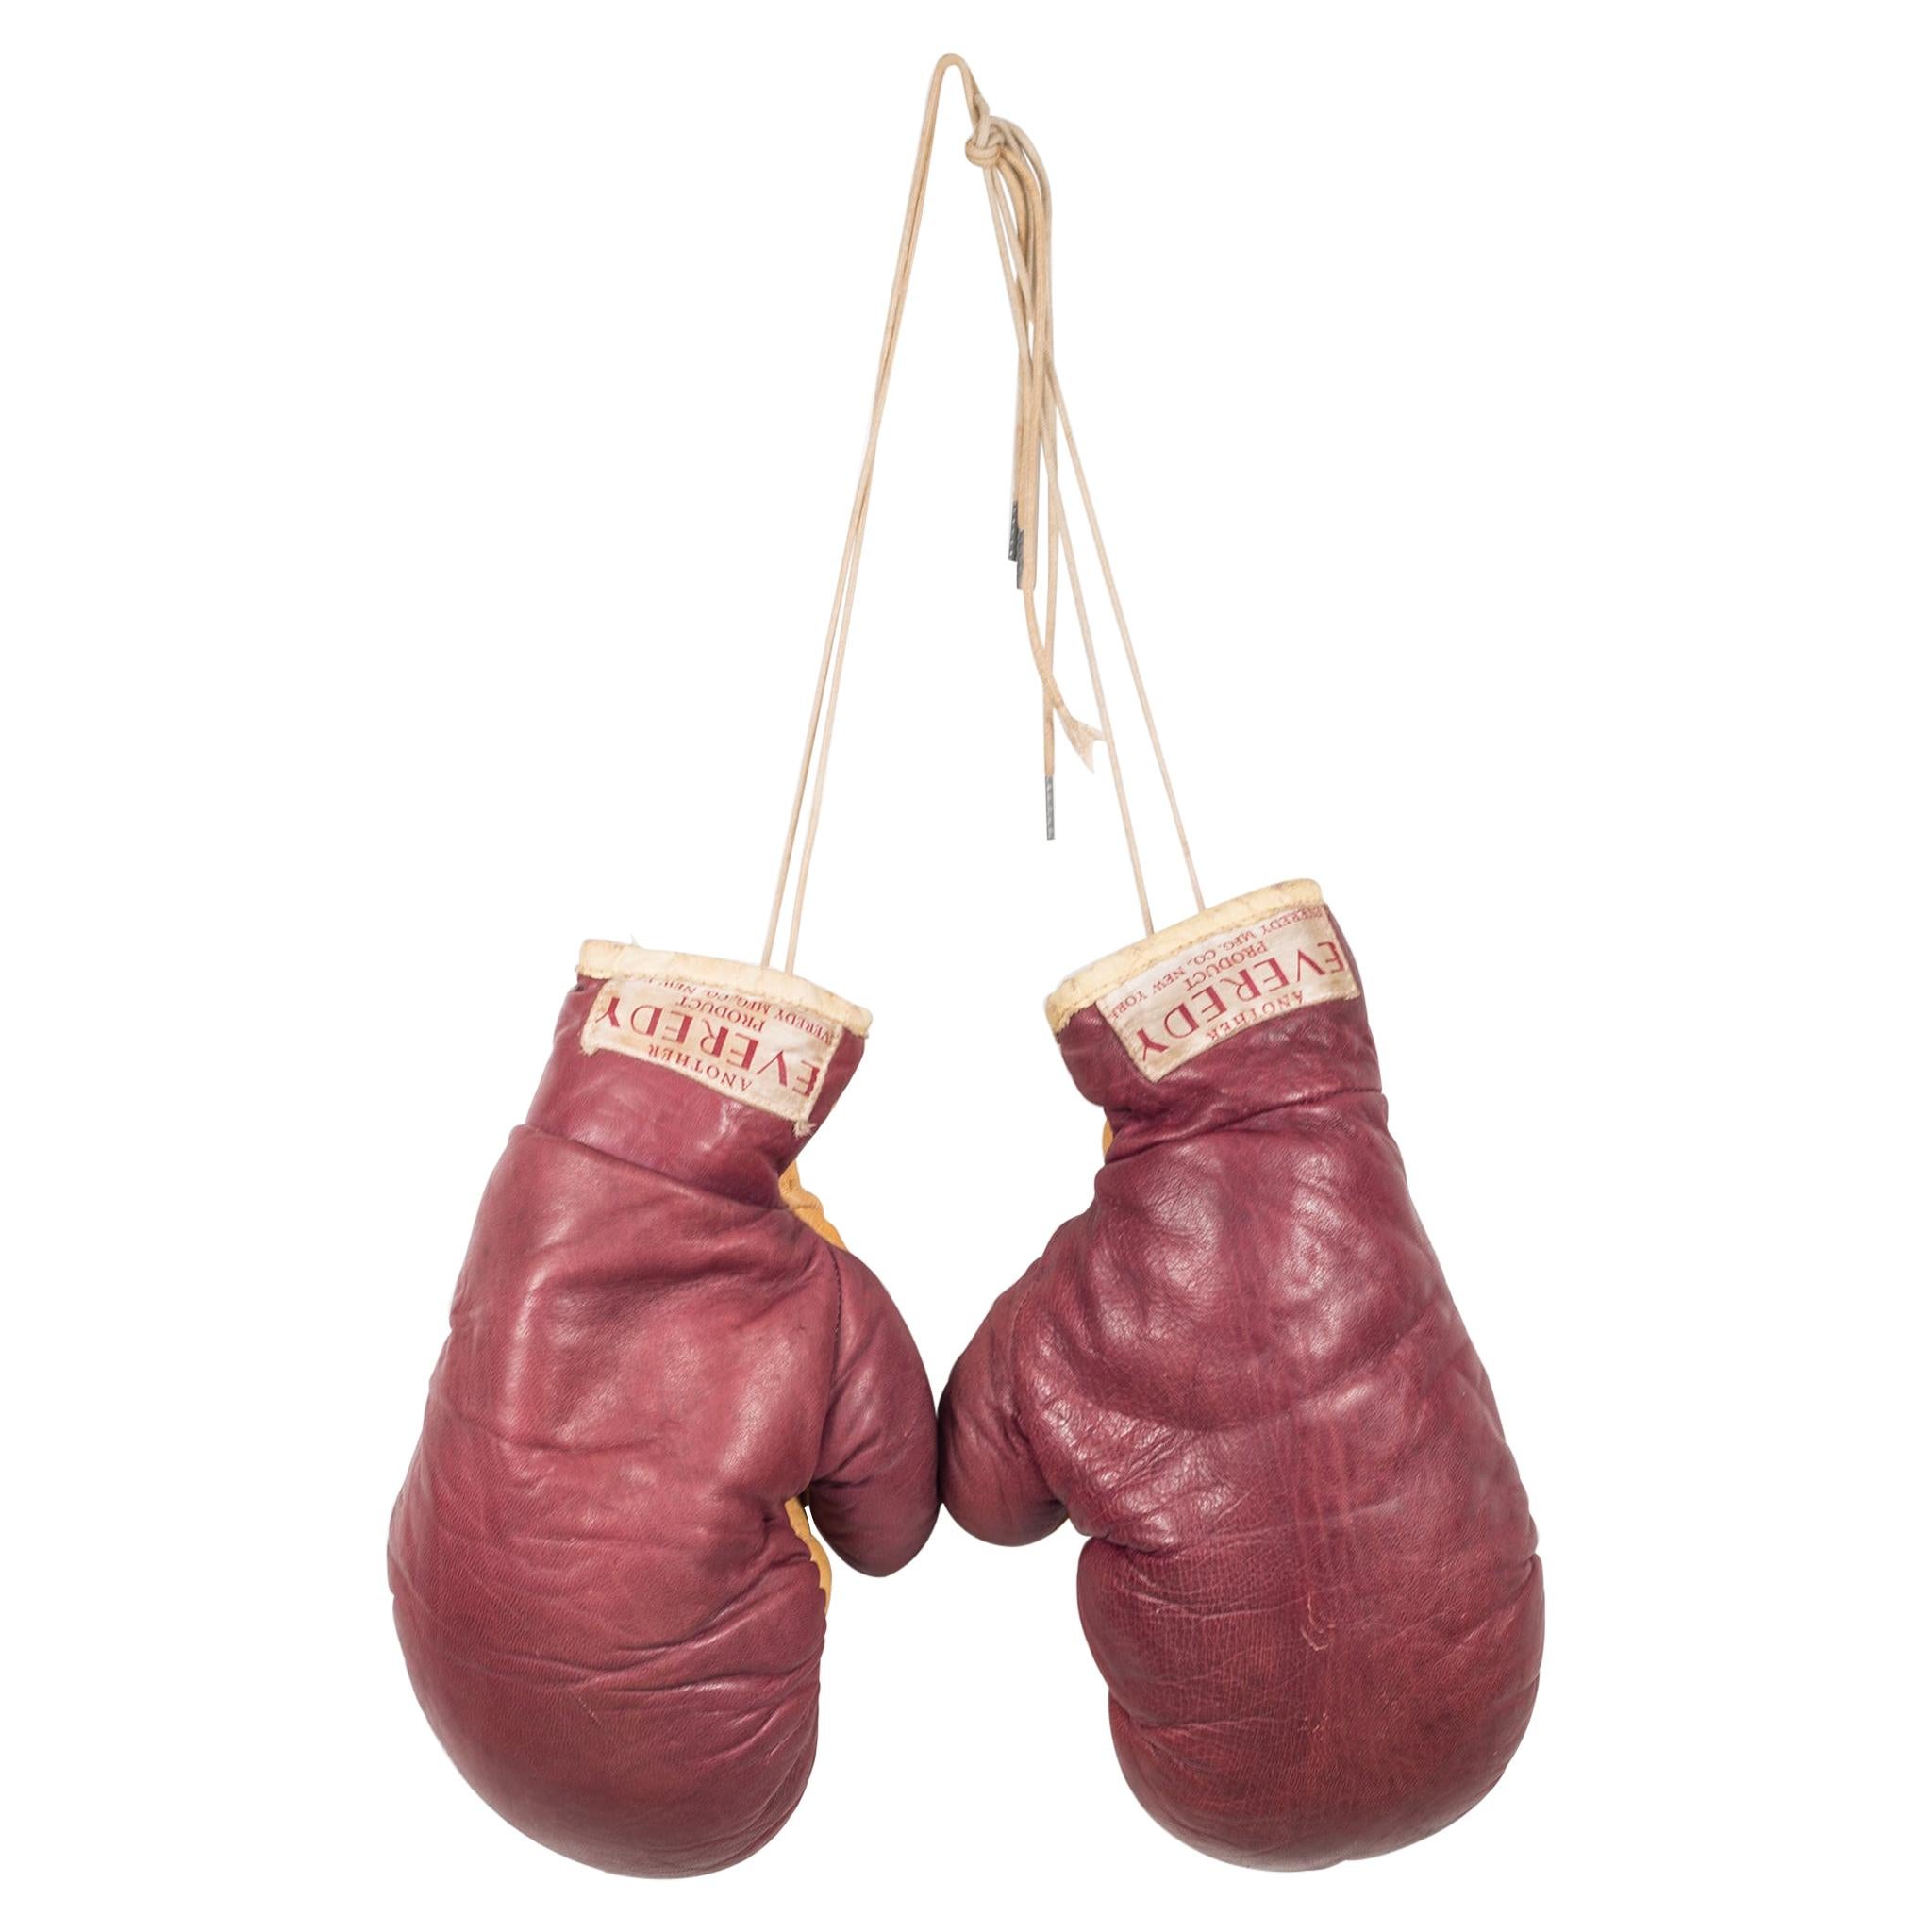 Pair of Vintage Horse Hair and Leather Boxing Gloves, circa 1940